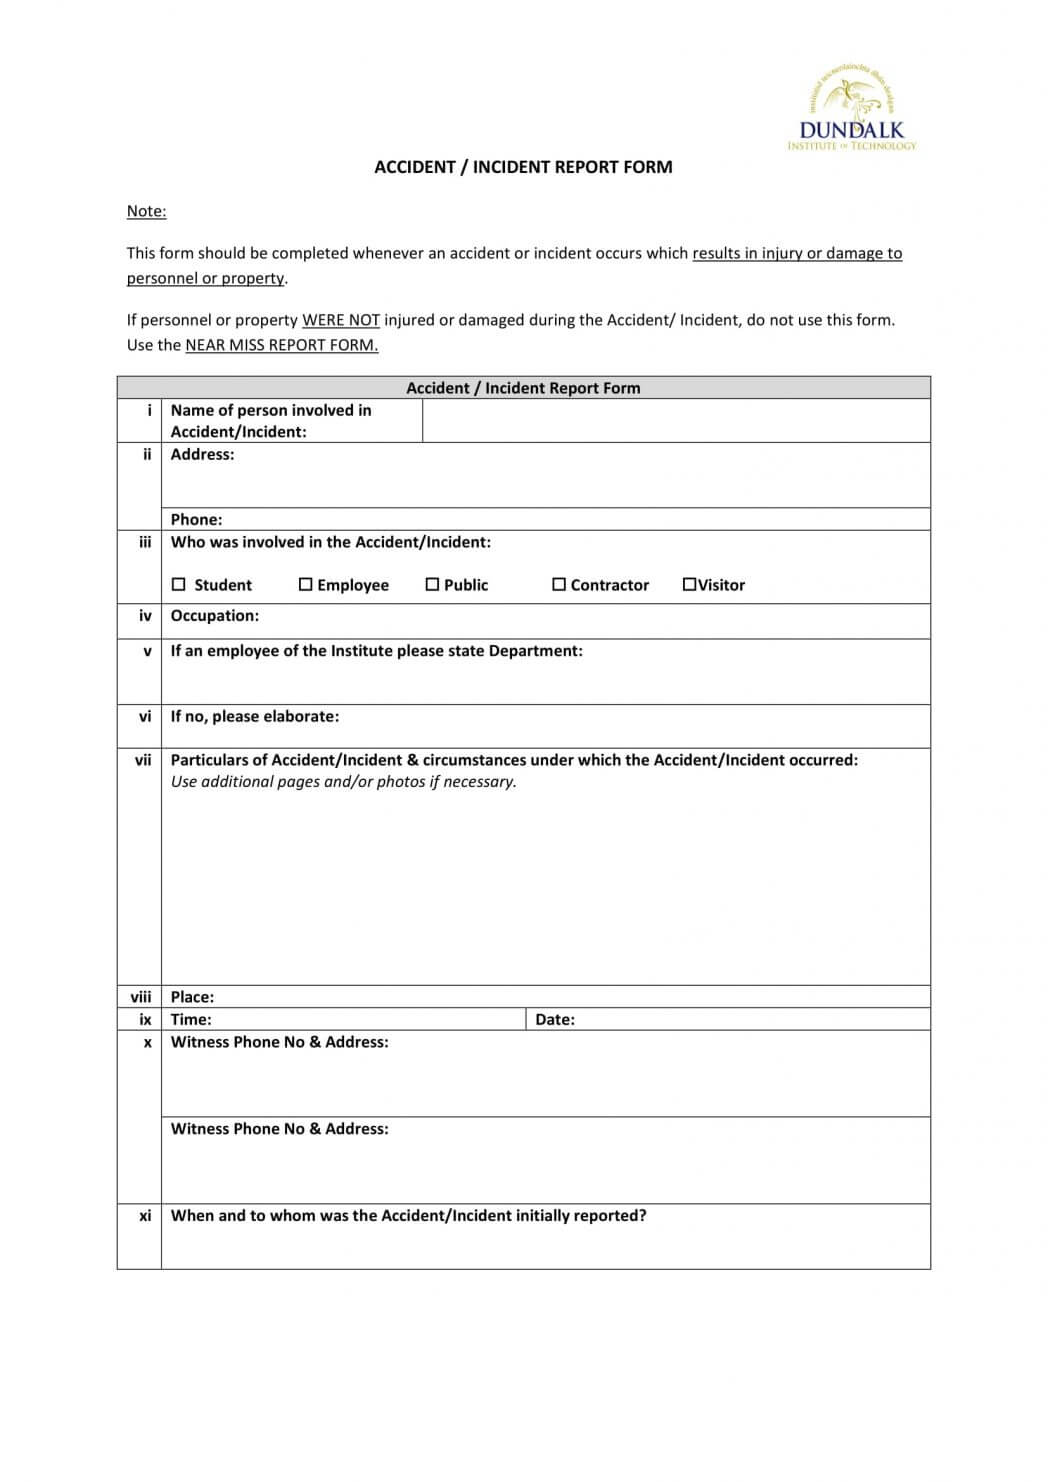 Report Writing Template Free